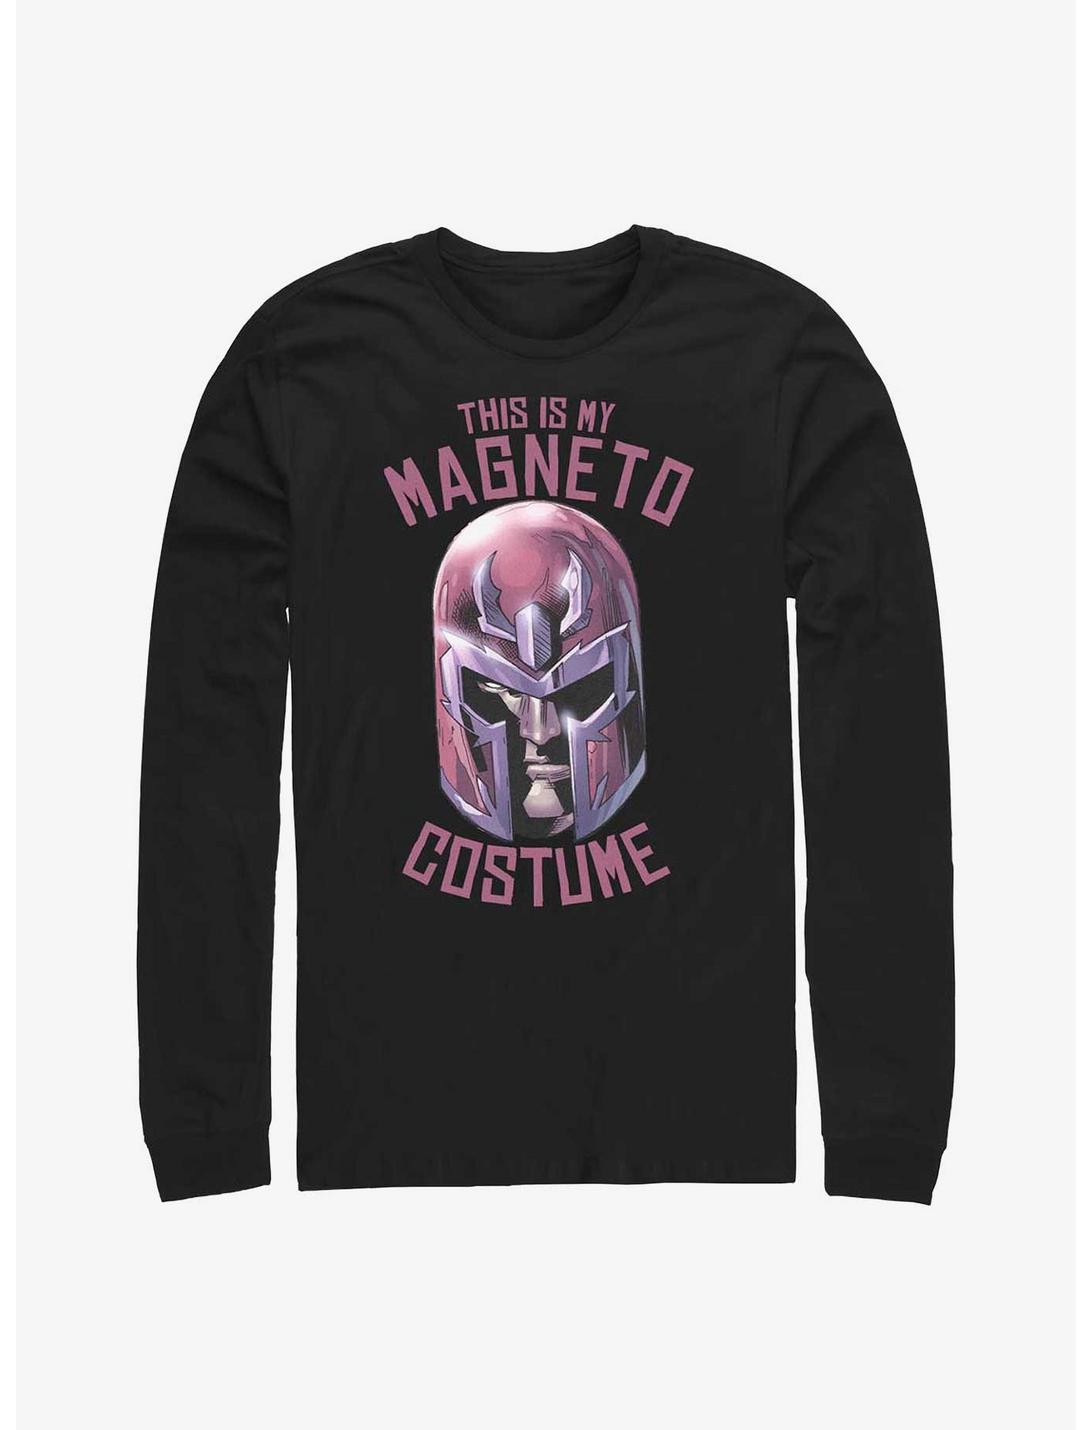 Marvel X-Men This Is My Magneto Costume Long-Sleeve T-Shirt, BLACK, hi-res